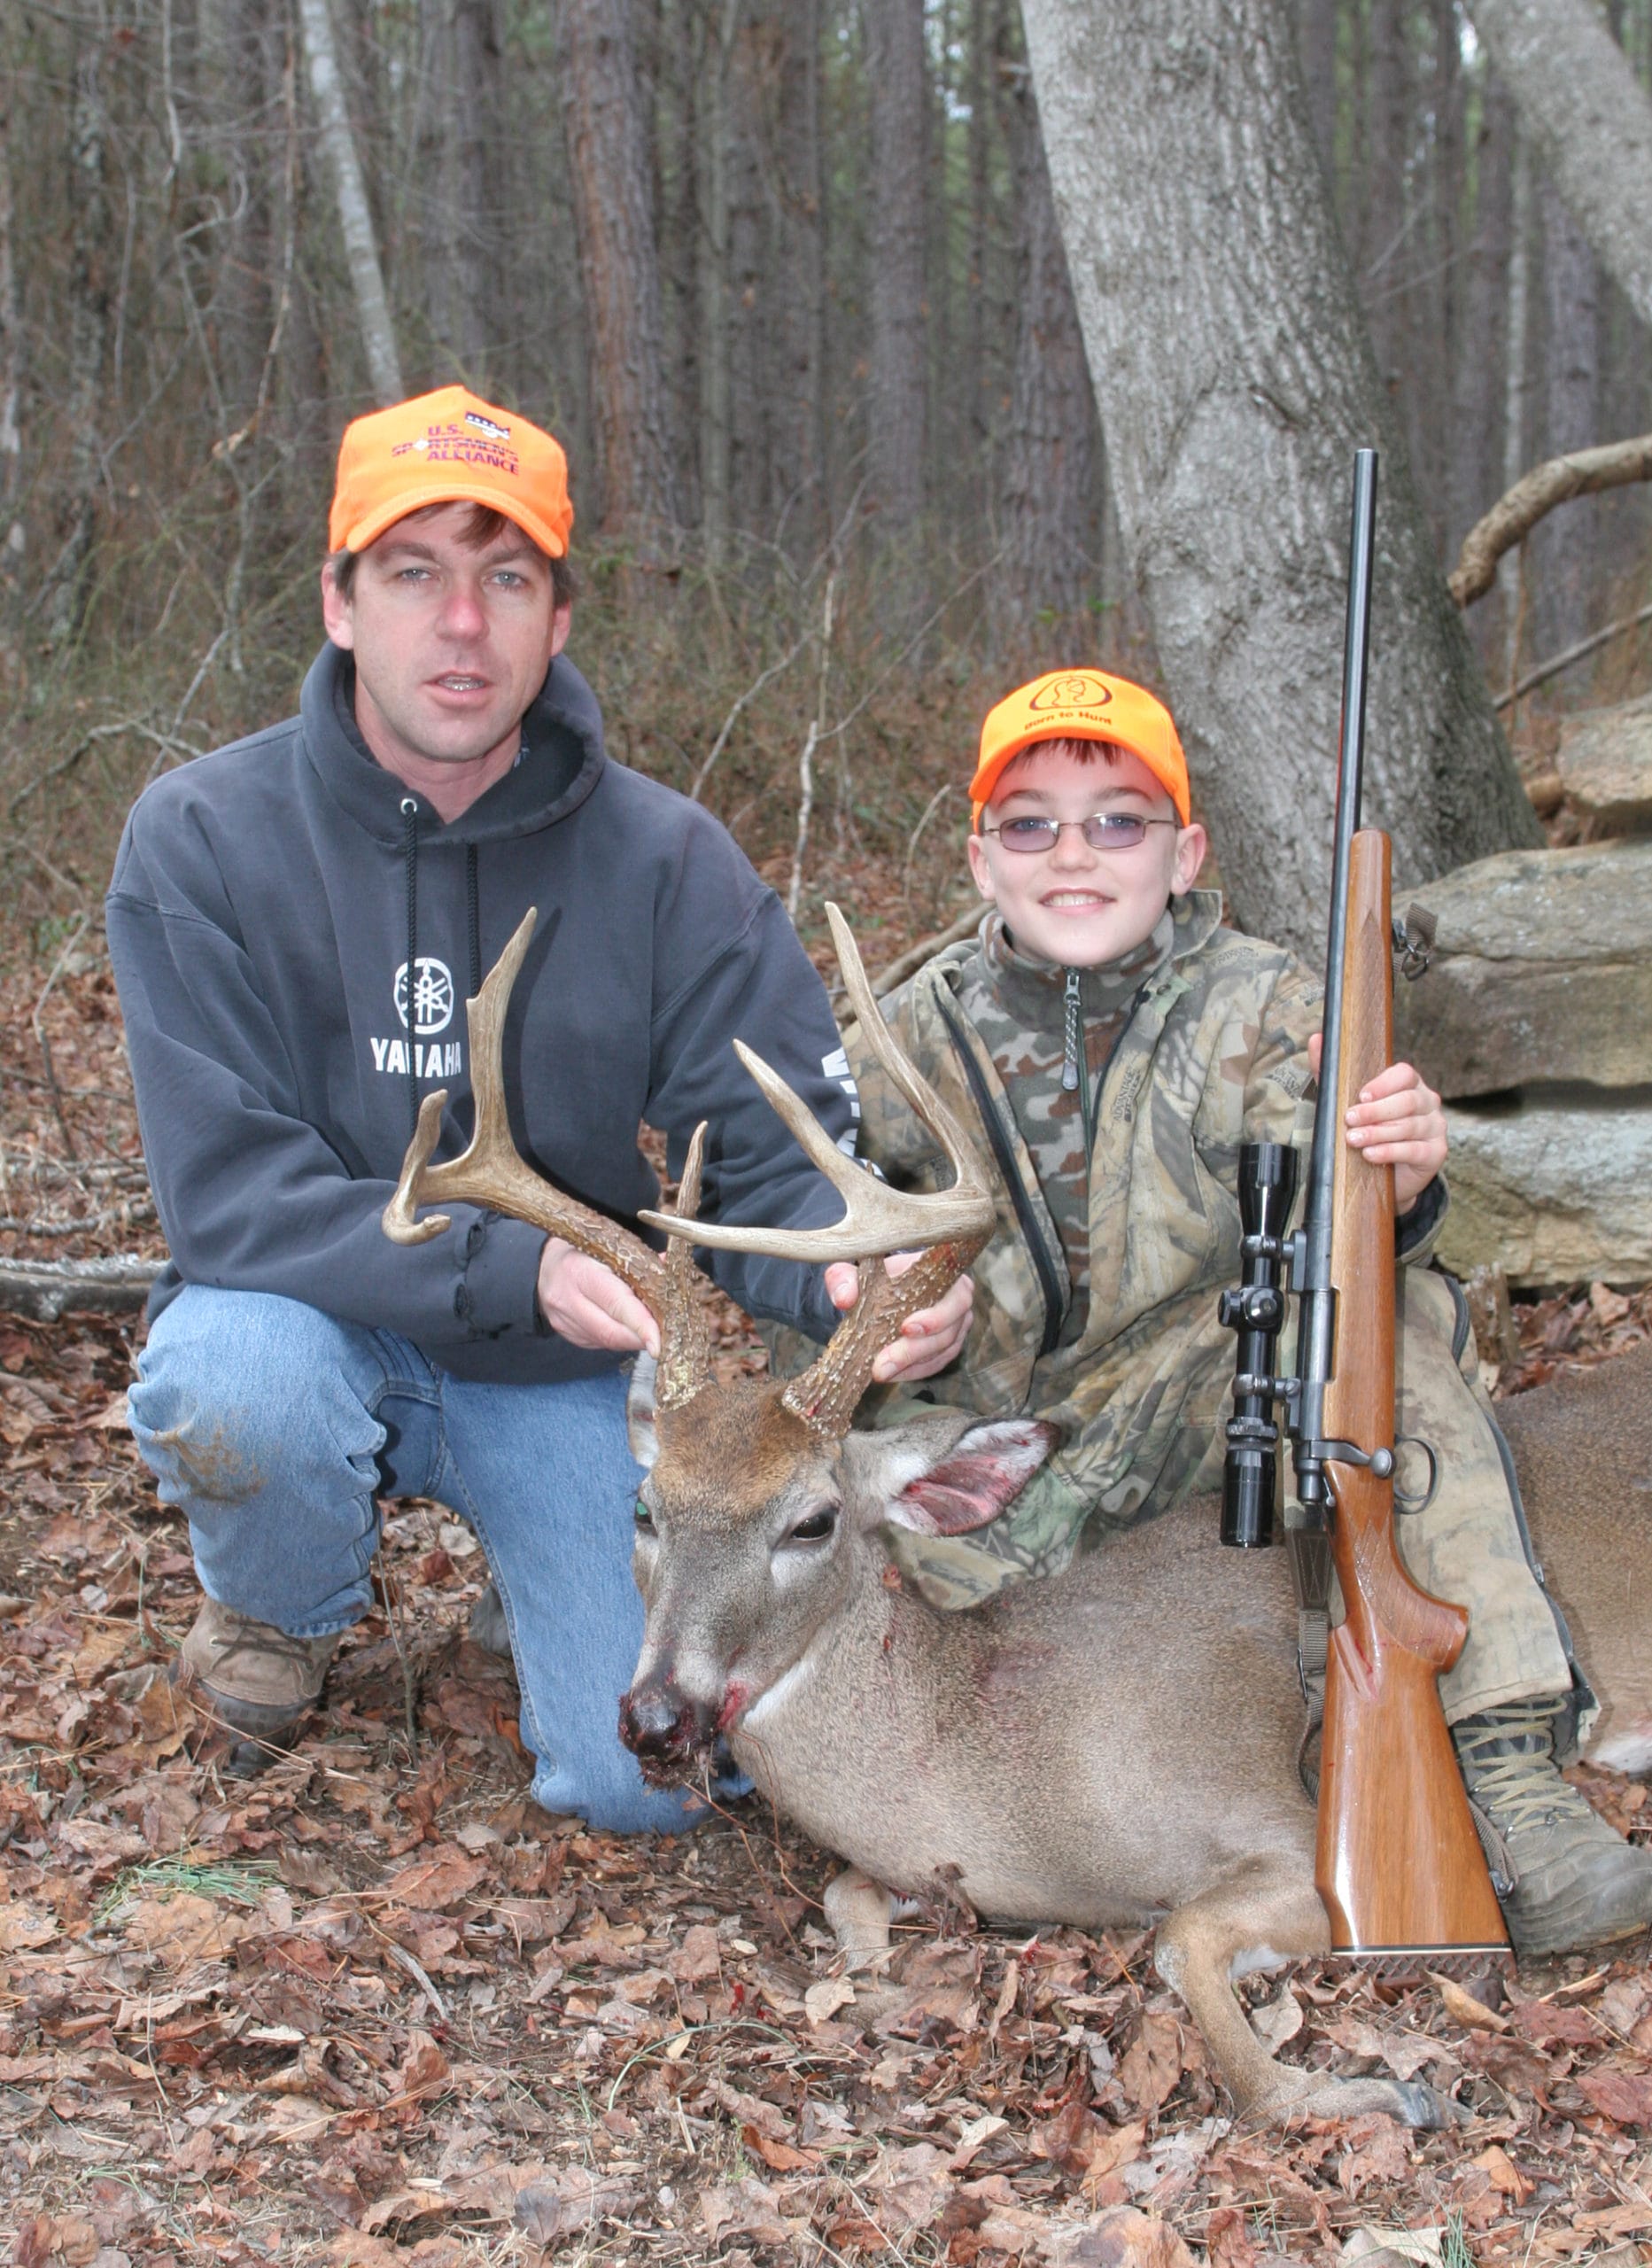 A lease can give you a place to take your children without having to be concerned about other hunters.